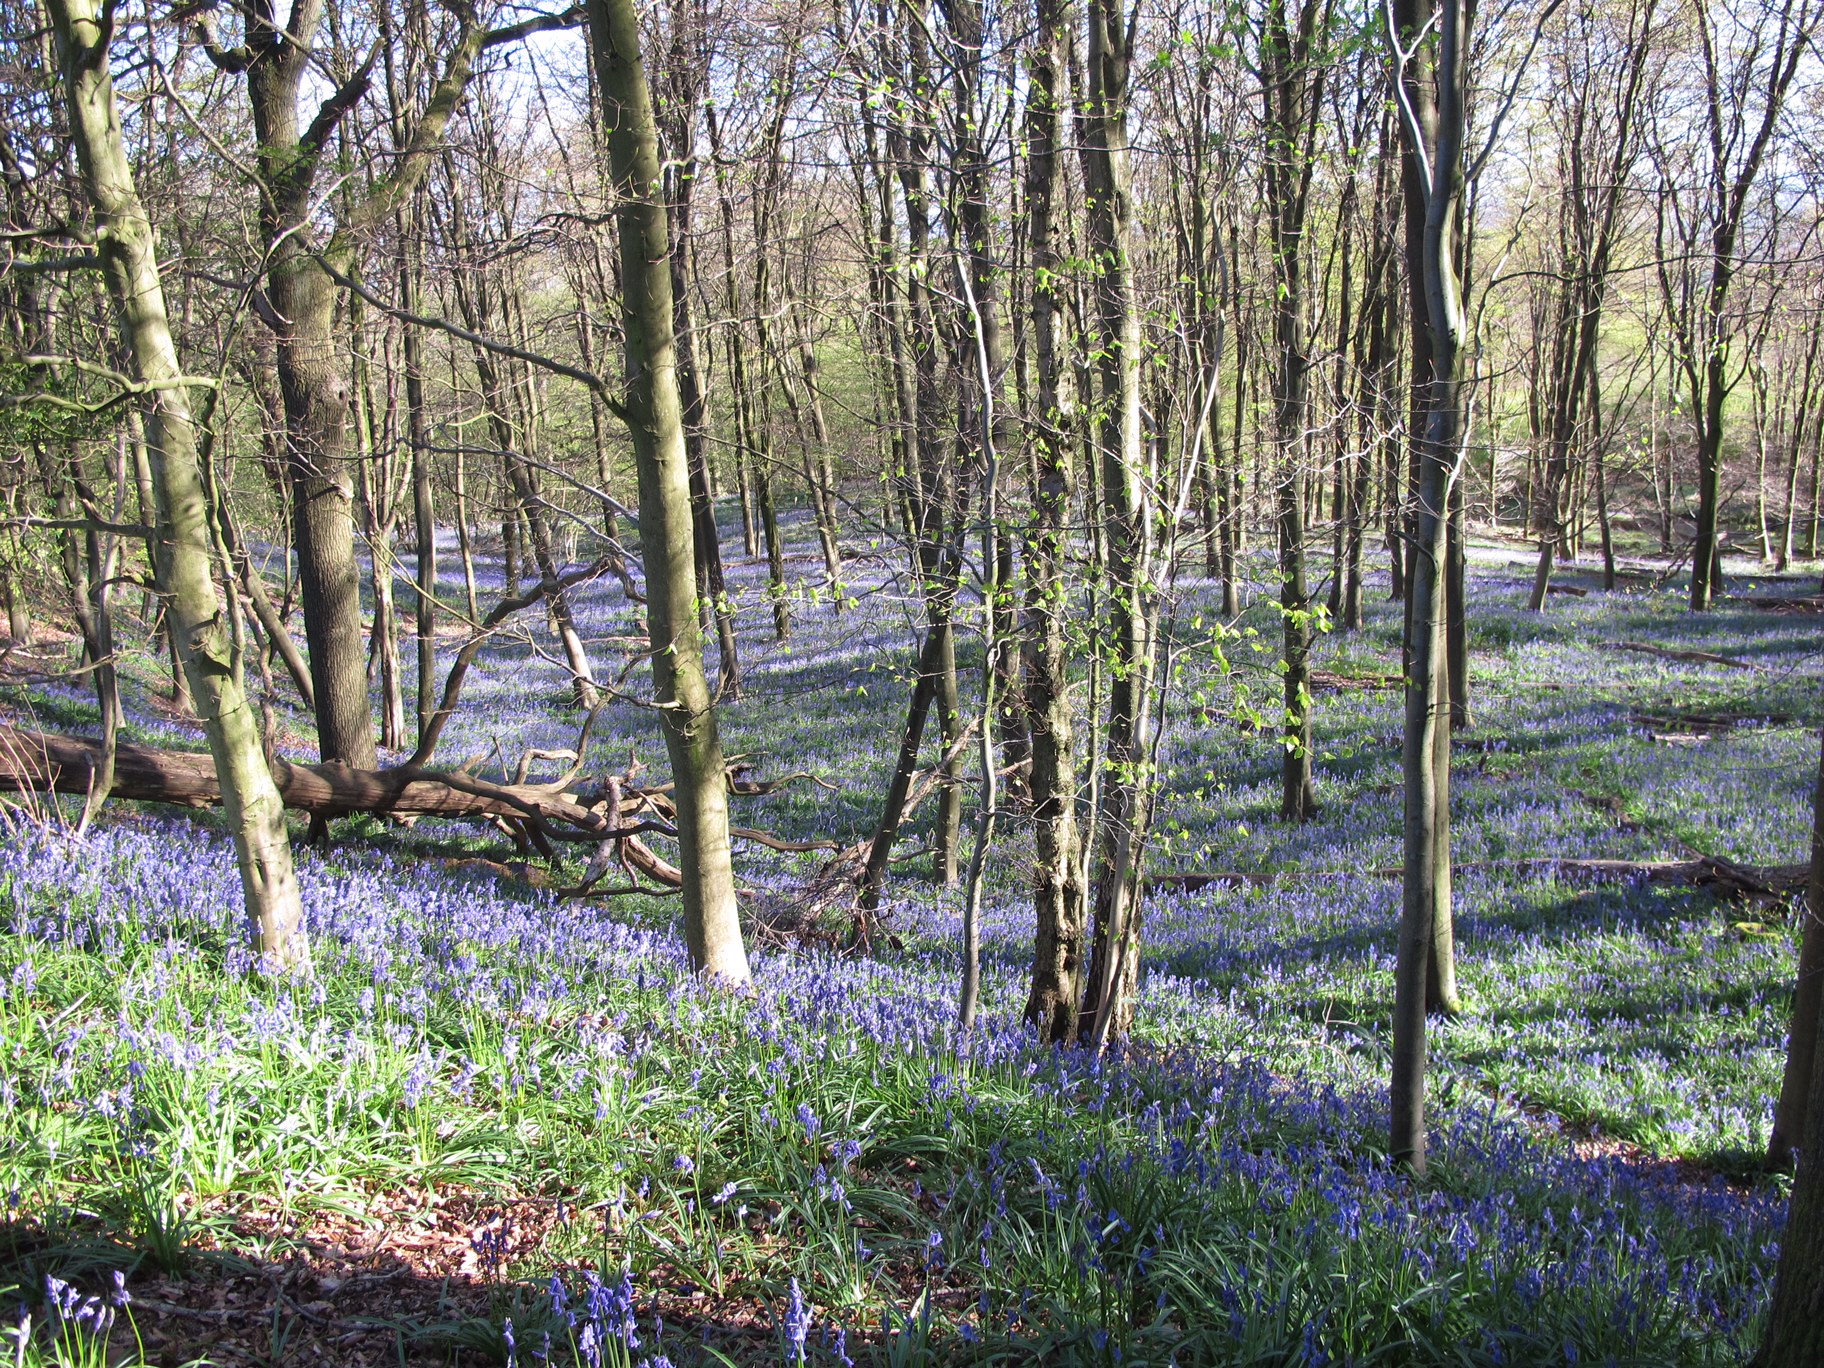 GAD - Generalised Anxiety Disorder - Out of the Darkness: GAD - Generalised Anxiety Disorder - Out of the Darkness: Bluebells.